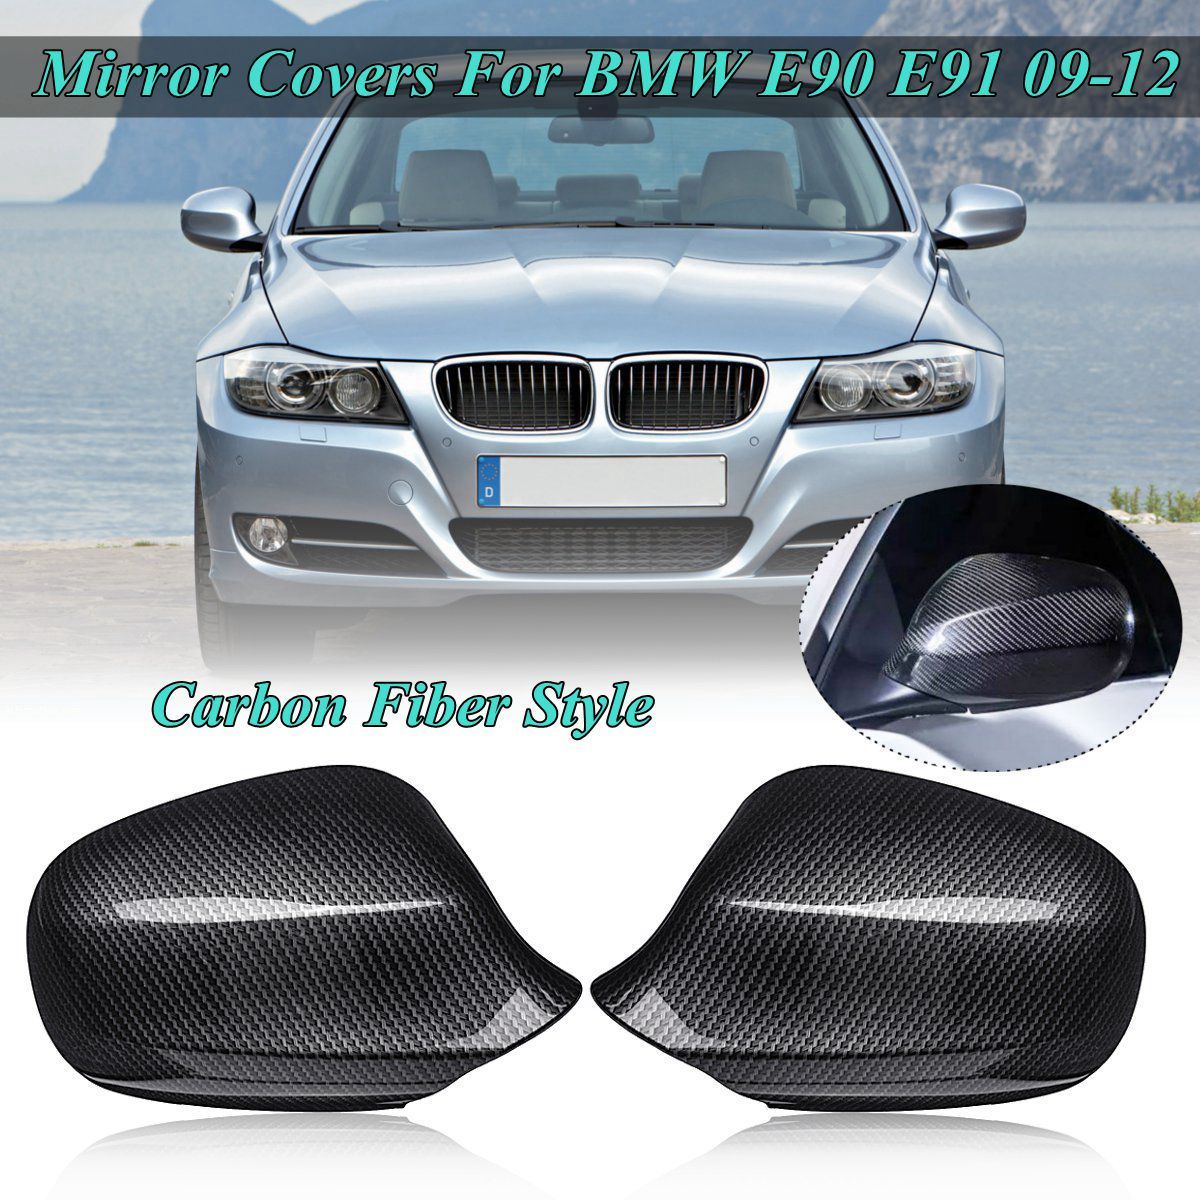 1-Pair-Left-and-Right-Carbon-Fiber-Style-Car-Rearview-Mirror-Cover-For-BMW-E90-E91-2009-2012-1378827